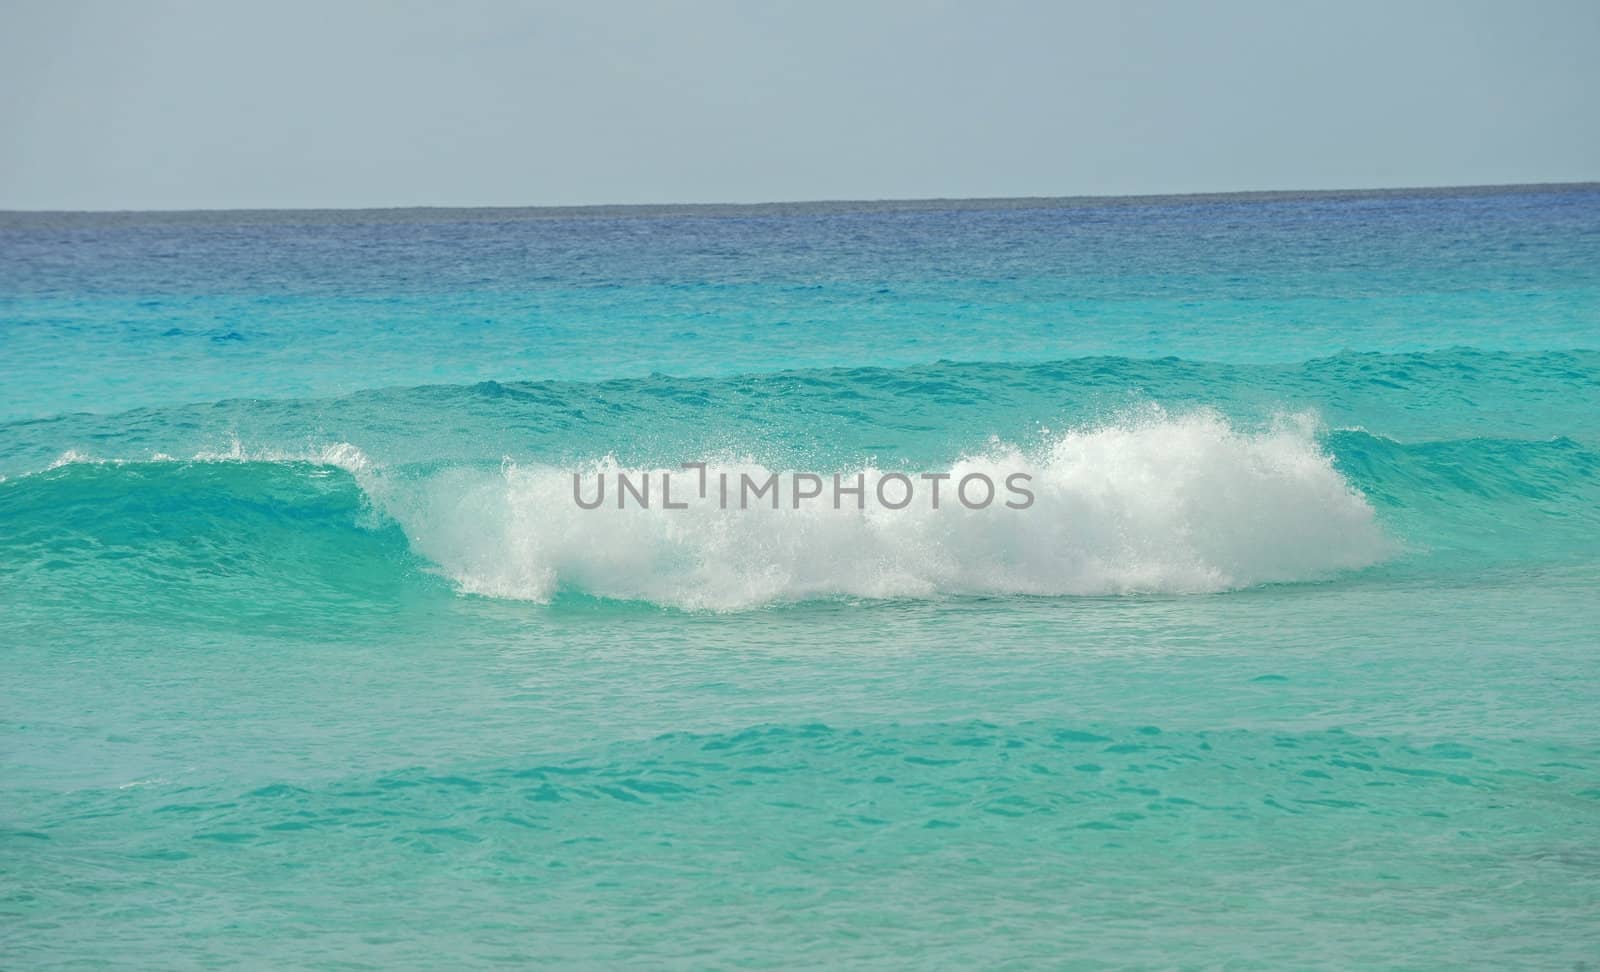 Waves in tropical setting by ftlaudgirl